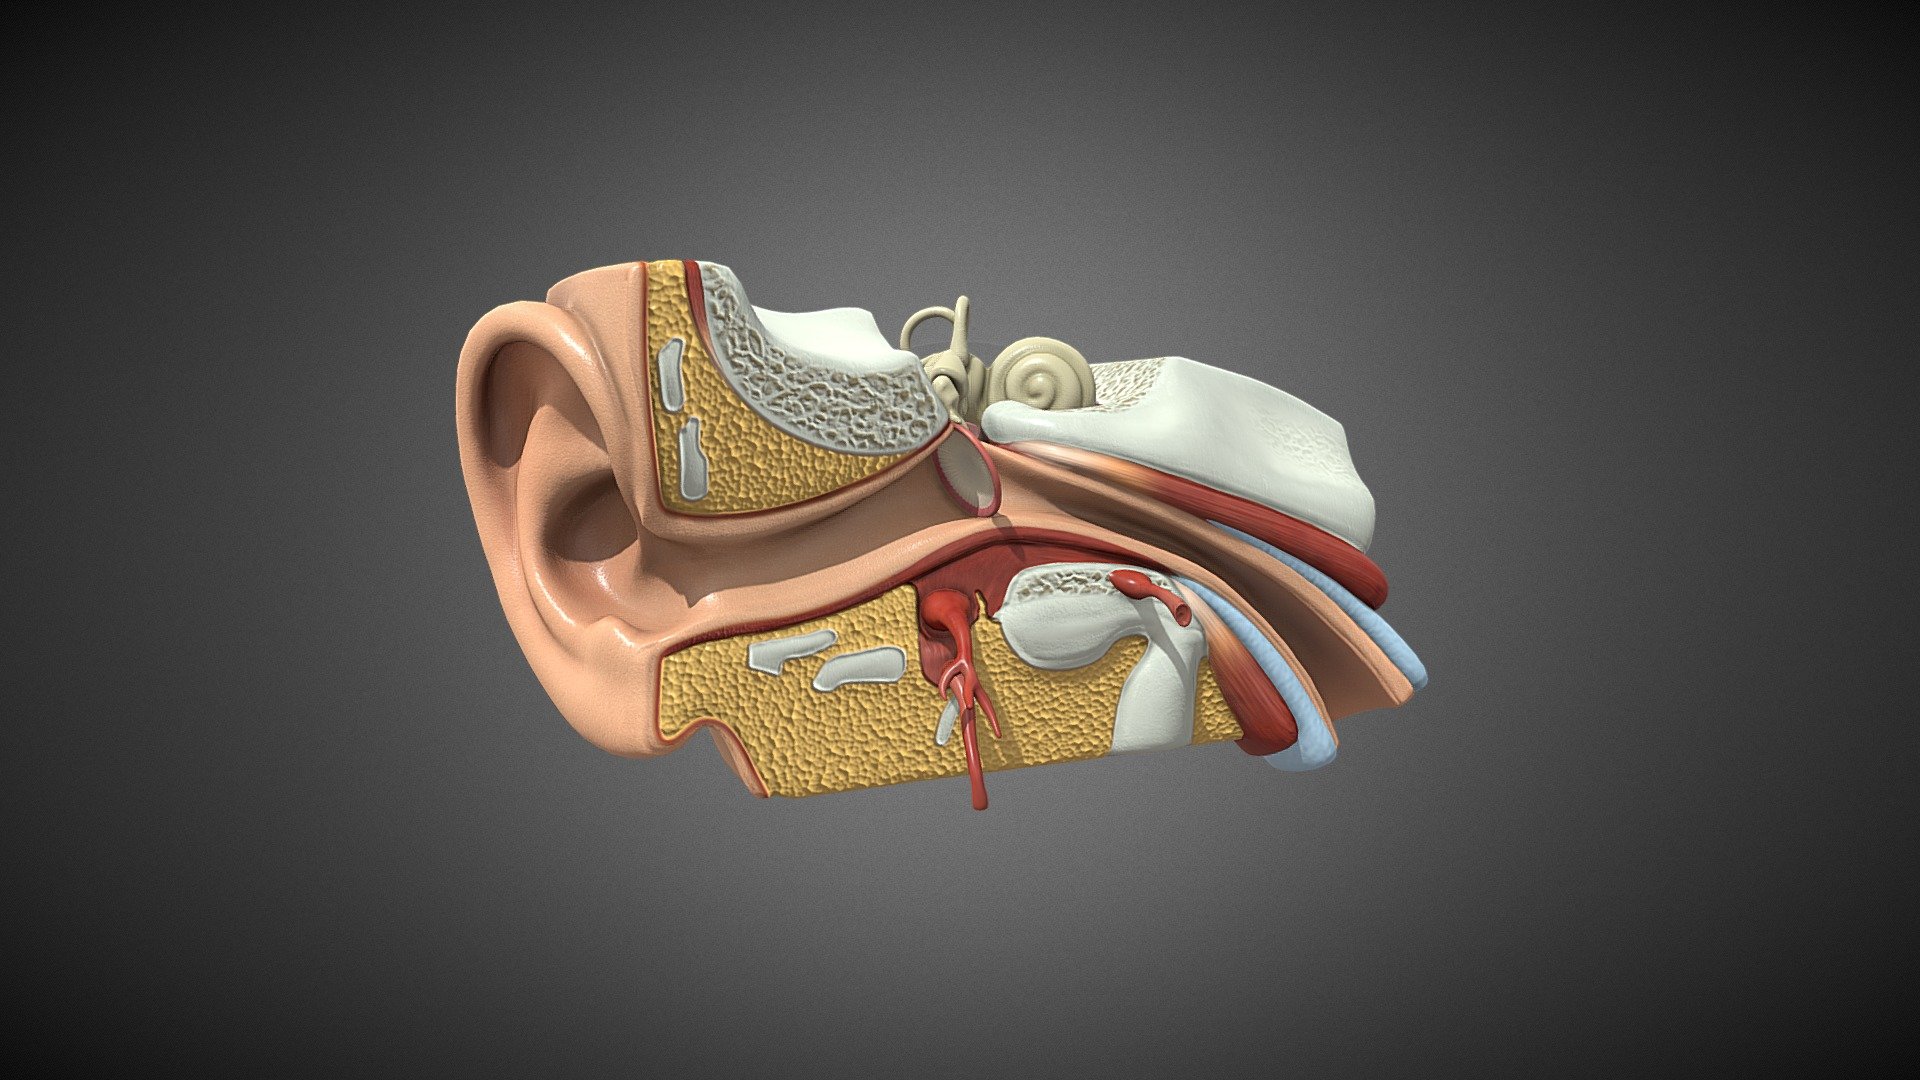 This model consists of Realistic looking Human Ear Anatomy with High quality textures. These models are optimized to be compatible with AR,VR, Games, and 3D animation purposes. 

For Unity3d (Built-in, URP, HDRP) Ready Assets visit our Unity Asset Store Page

Enjoy and please rate the asset!

Contact us on for AR/VR related queries and development support

Gmail - designer@devdensolutions.com

Website

Twitter

Instagram

Facebook

Linkedin

Youtube - Human Ear Anatomy - Buy Royalty Free 3D model by Devden 3d model